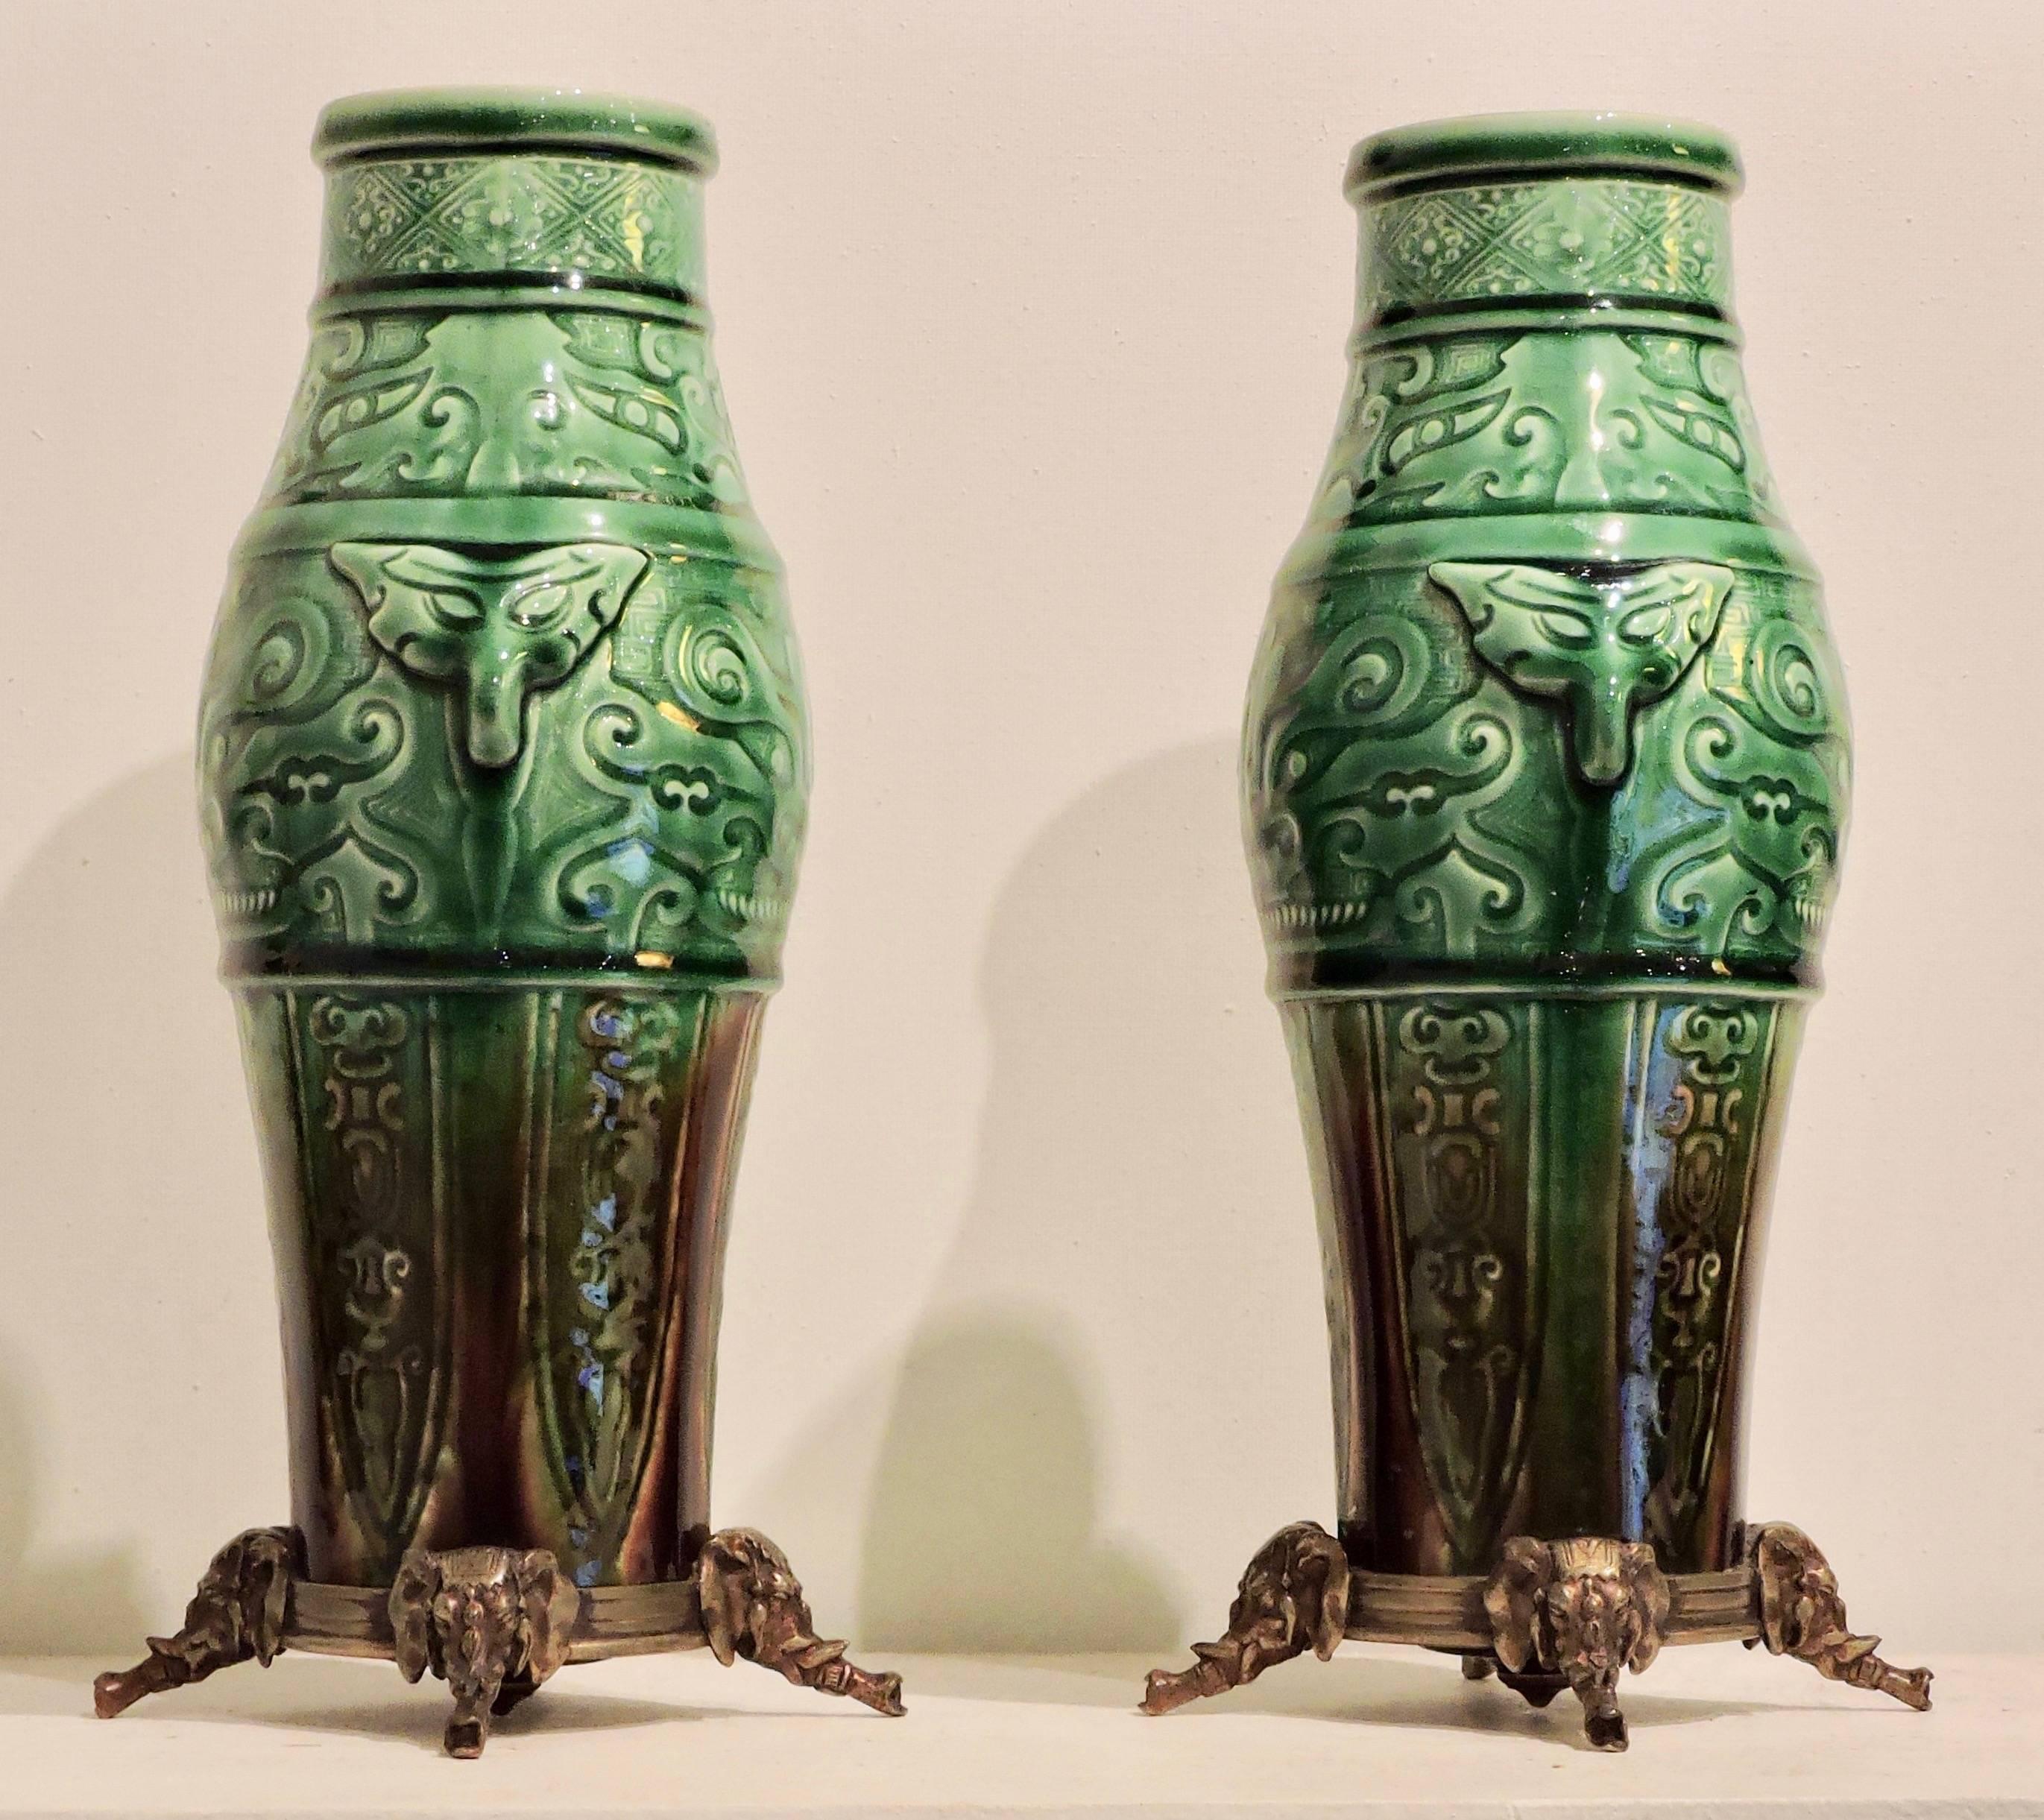 A Theodore Deck celadon and brown faience pair of vases moulded in the Chinese archaistic taste
The body with scrolls and cloud collar bands
Two patinas ormolu-mounted with elephants head's design.
Impressed TH.DECK on the mounts.